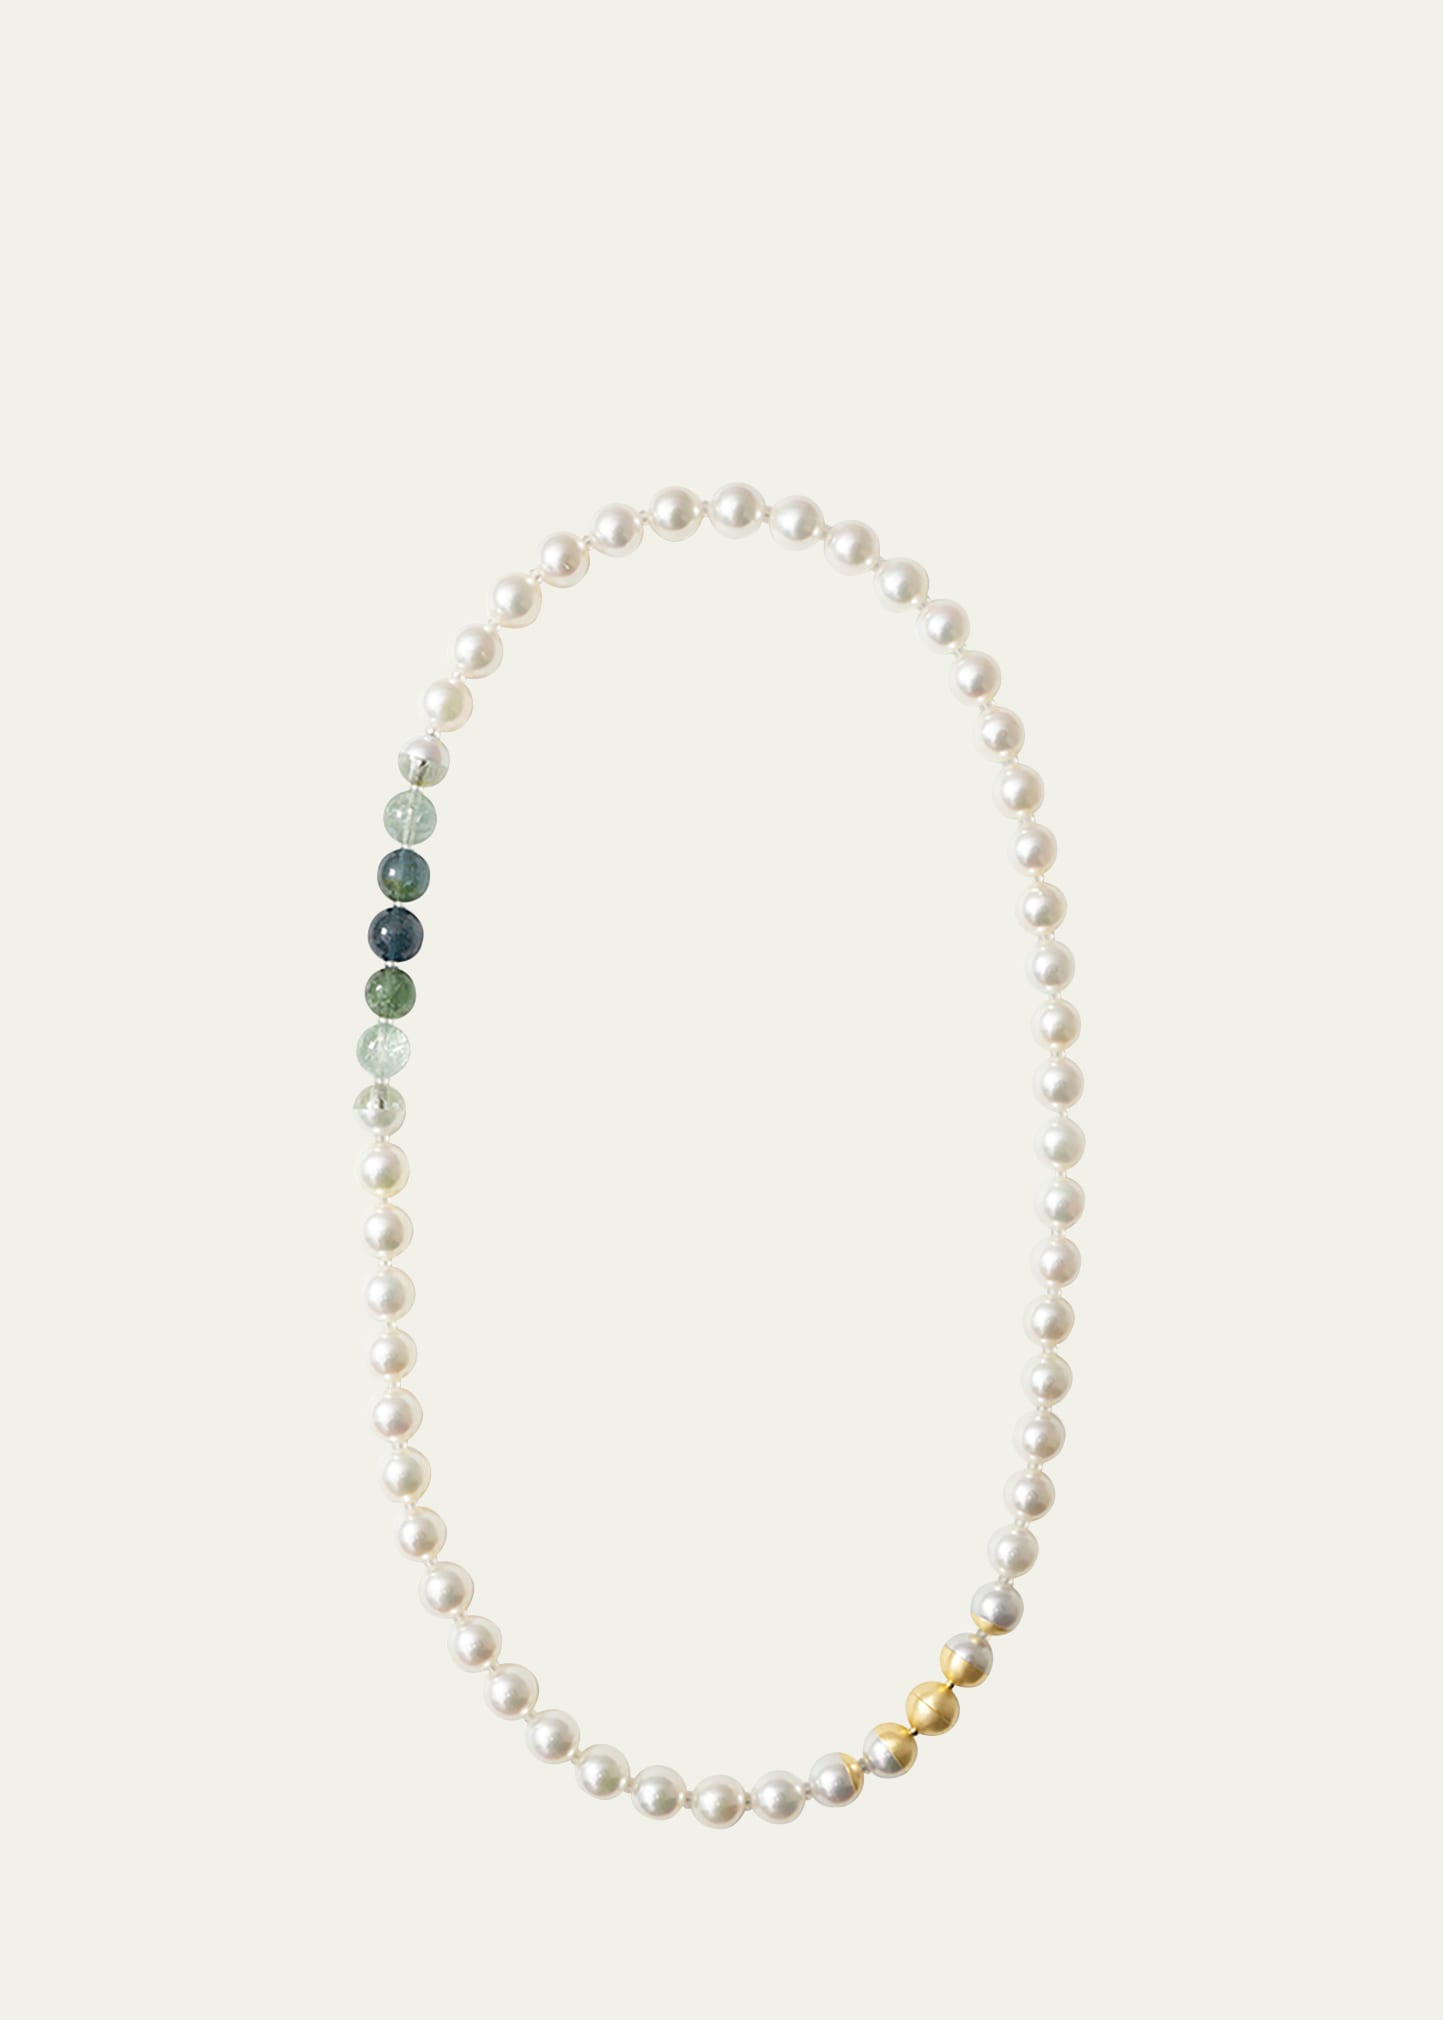 Yutai 18k Yellow Gold Sectional Pearl Necklace With Tourmaline And Cultured White Akoya Pearls In Blue Tourmaline